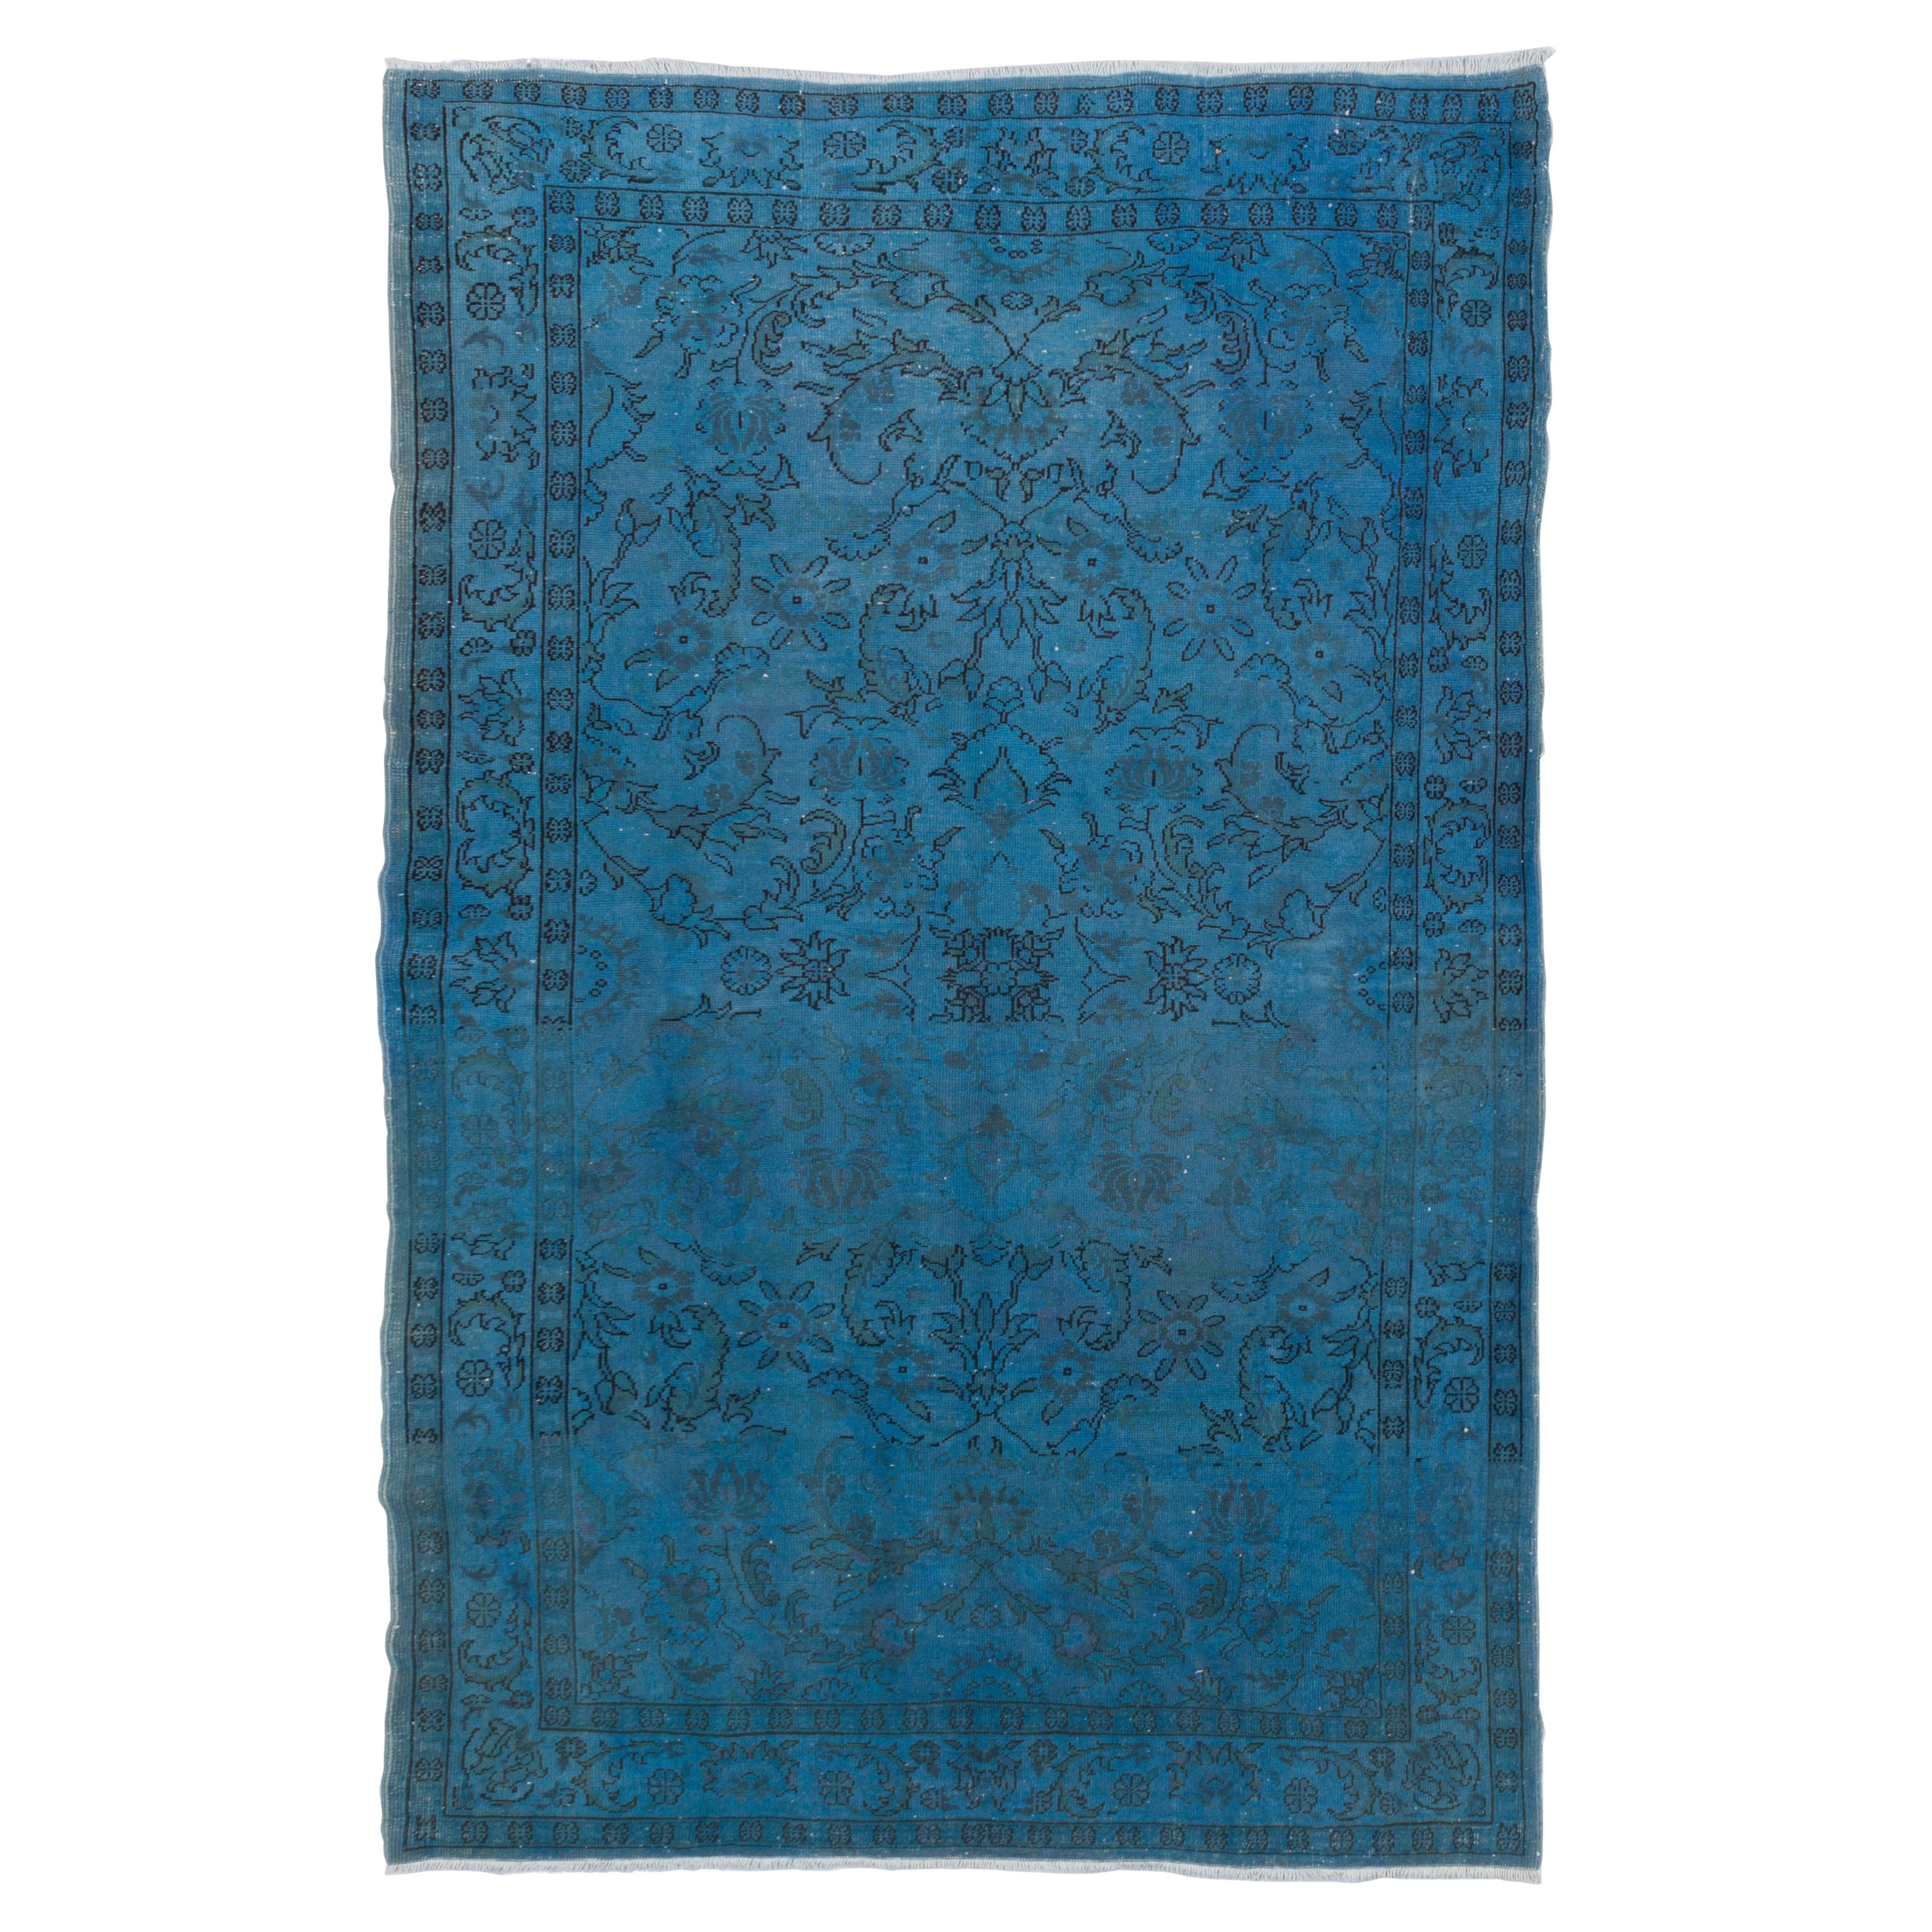 1960s Turkish Rug Re-Dyed in Blue Color, Ideal for Contemporary Interiors